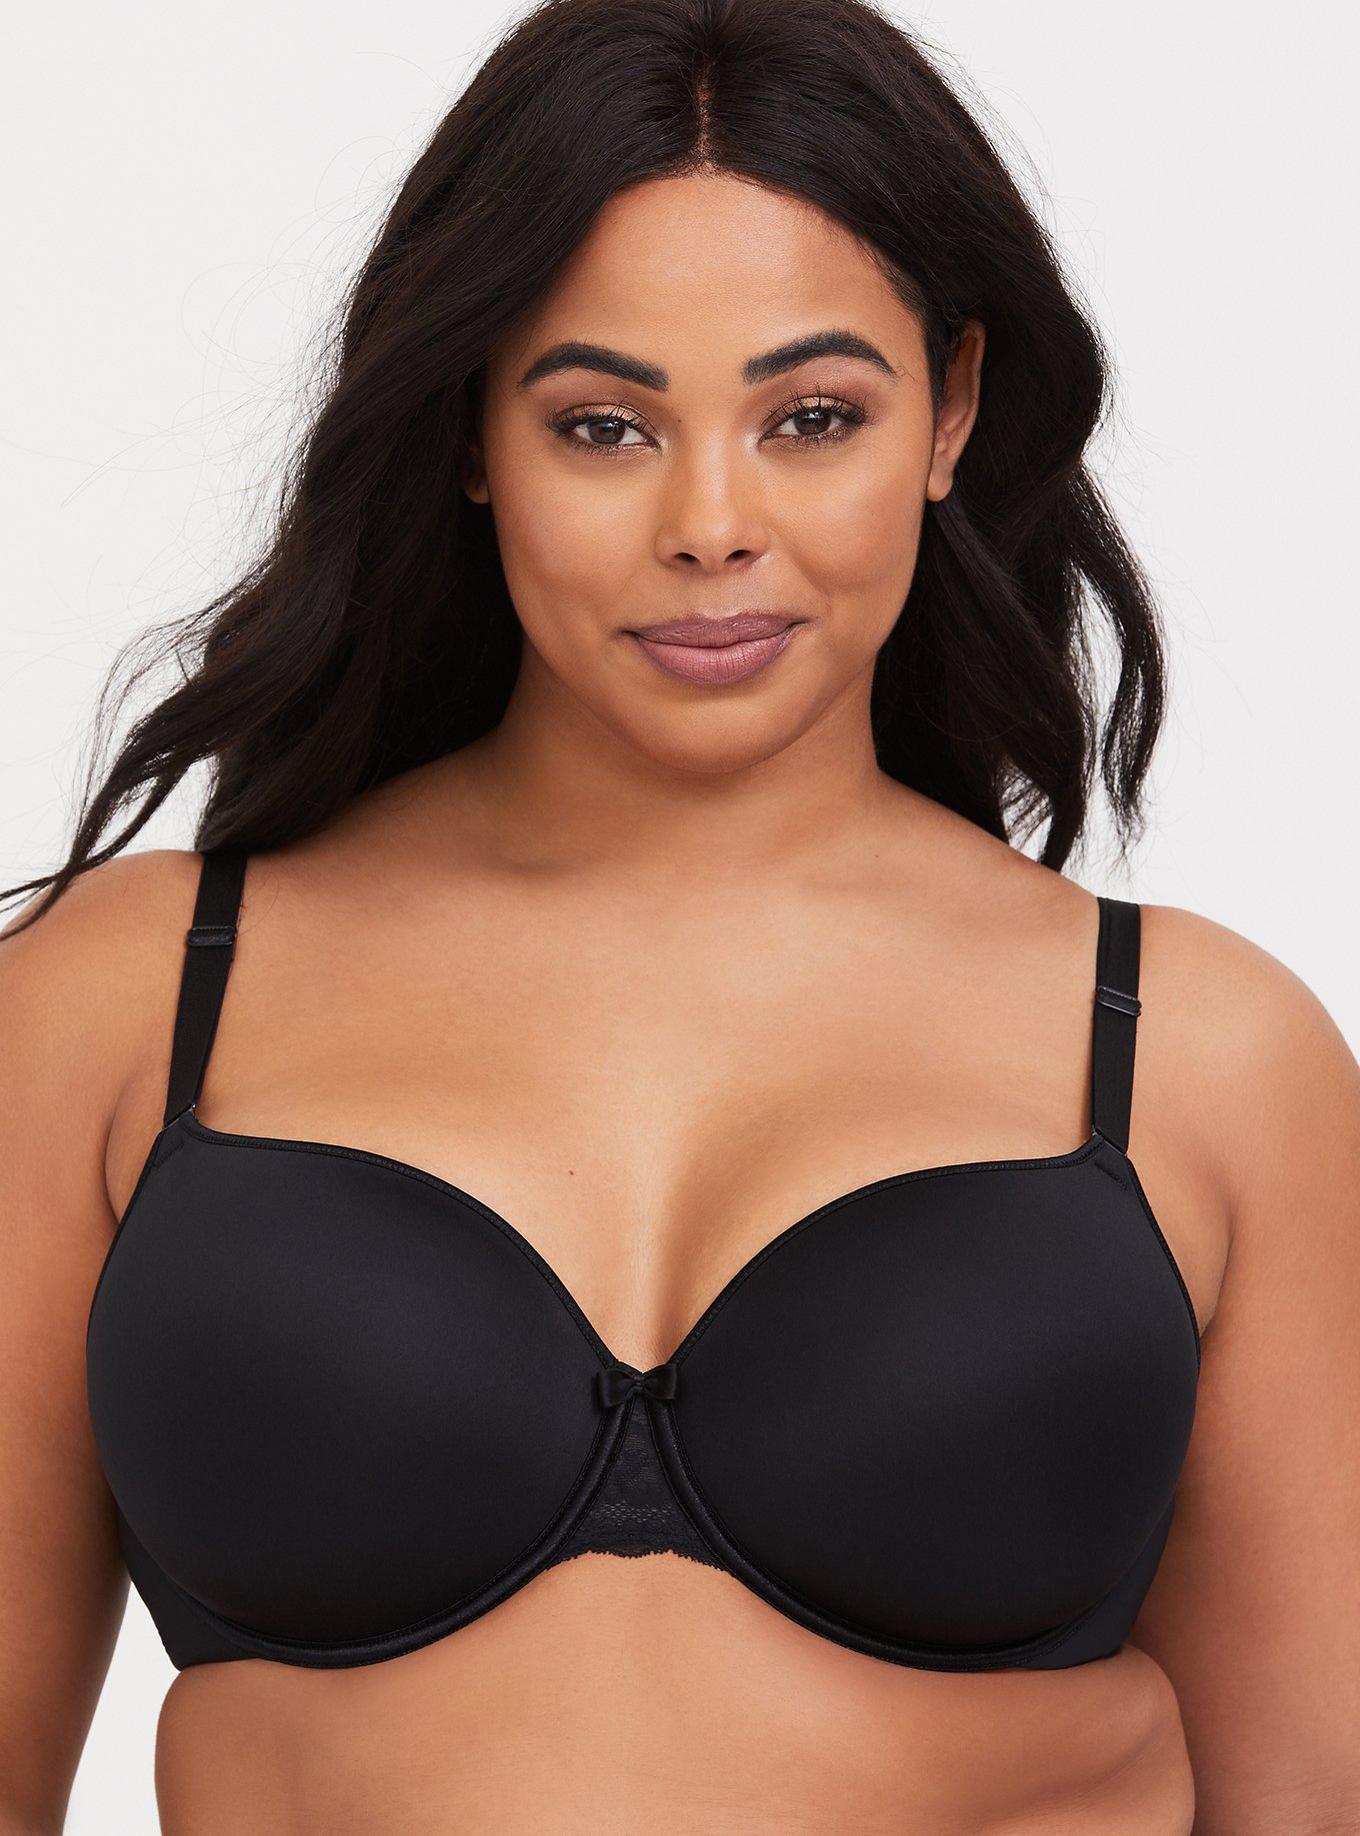 Plus Size Bras With Back Fat Coverage Women's Plus Size Bra,Casual